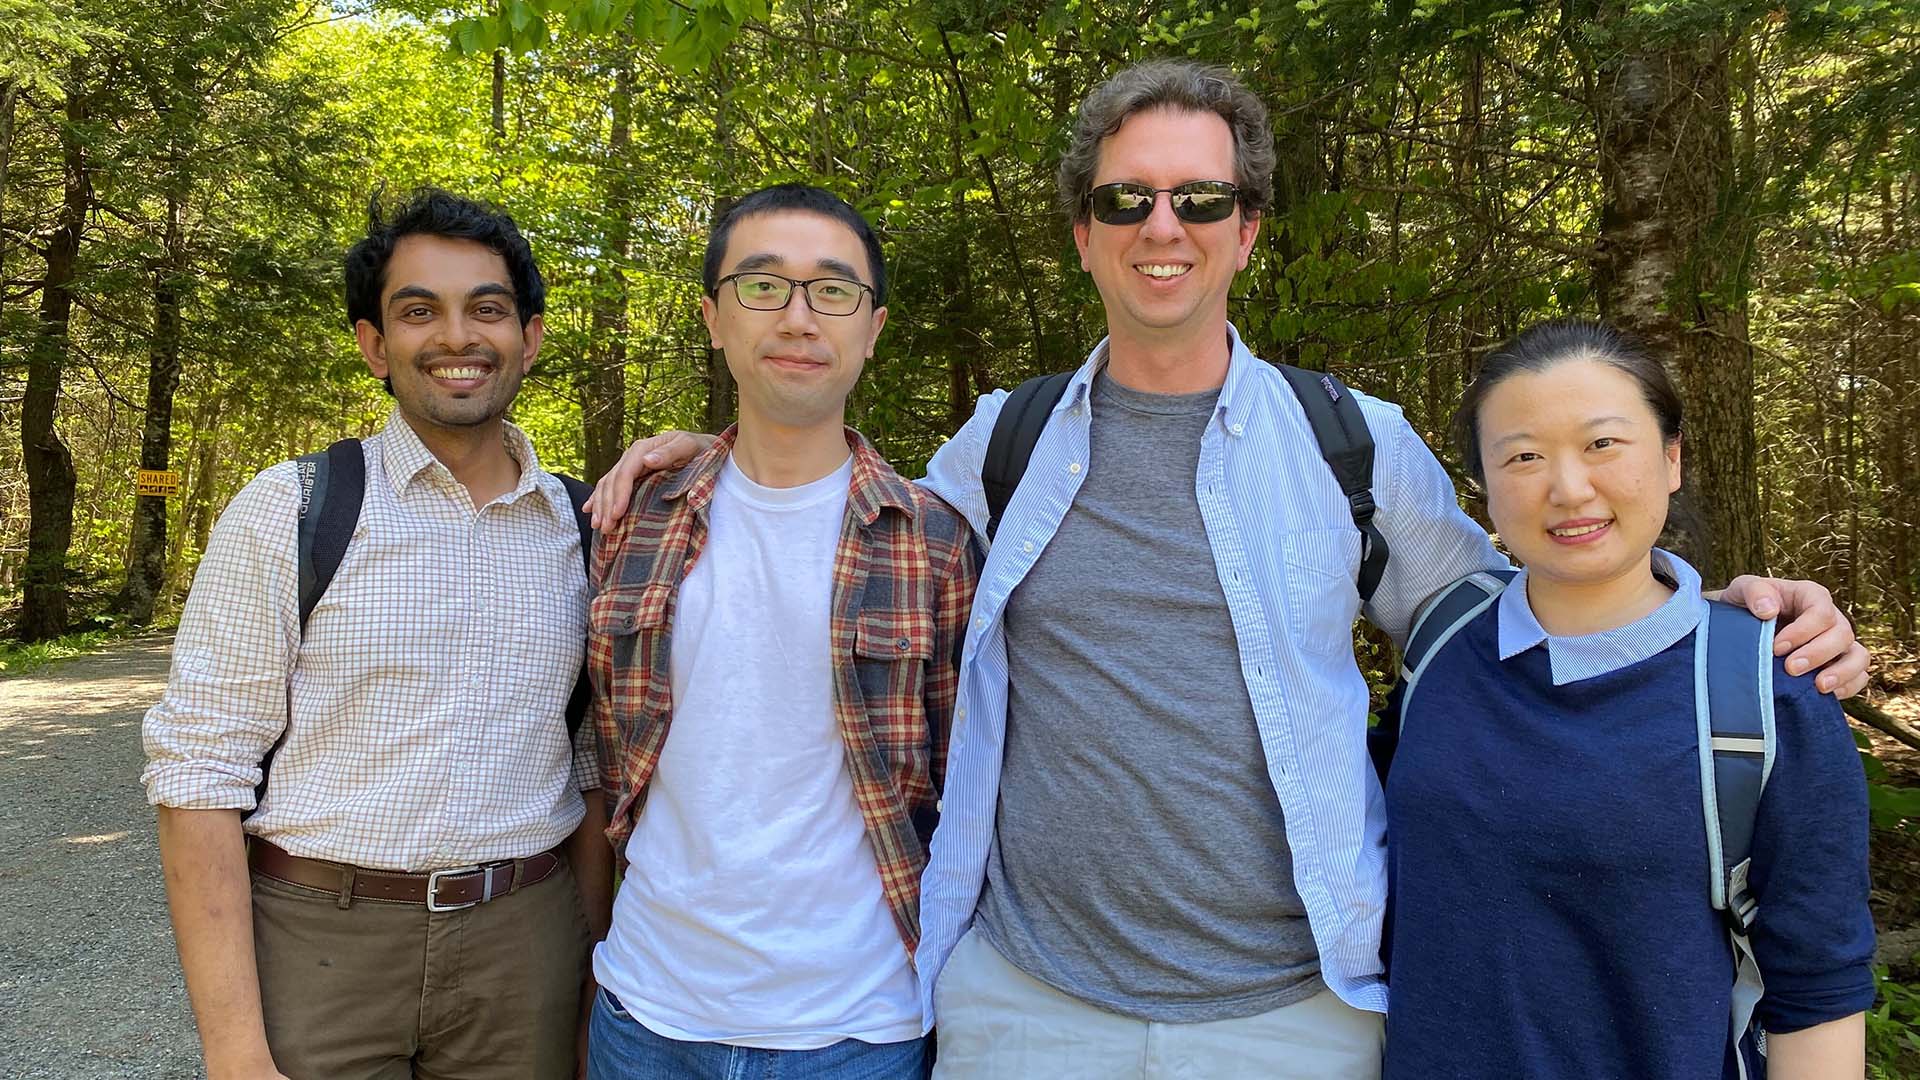 A group of four people, including Nicholas Navin, pose for a photo in a wooded area.